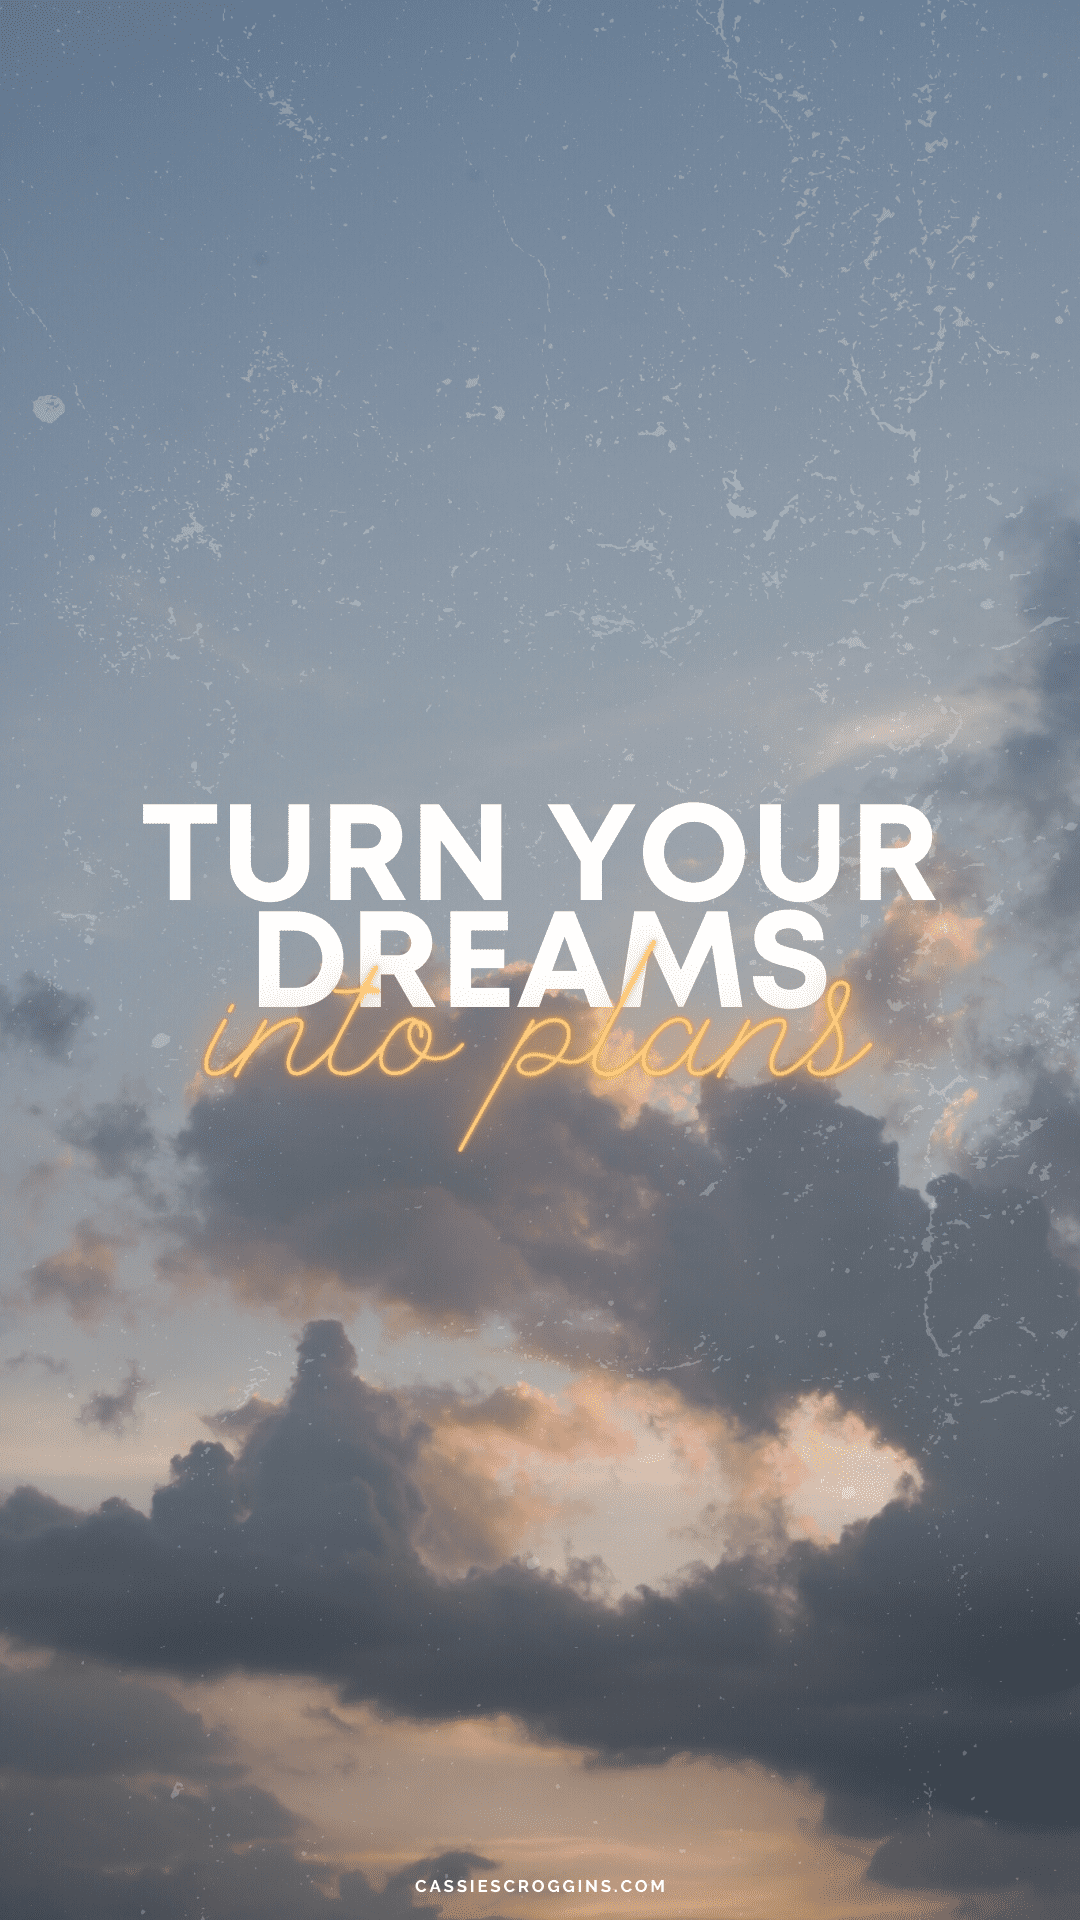 85+ Best Free Motivational iPhone Wallpapers to Keep You Inspired in 2023